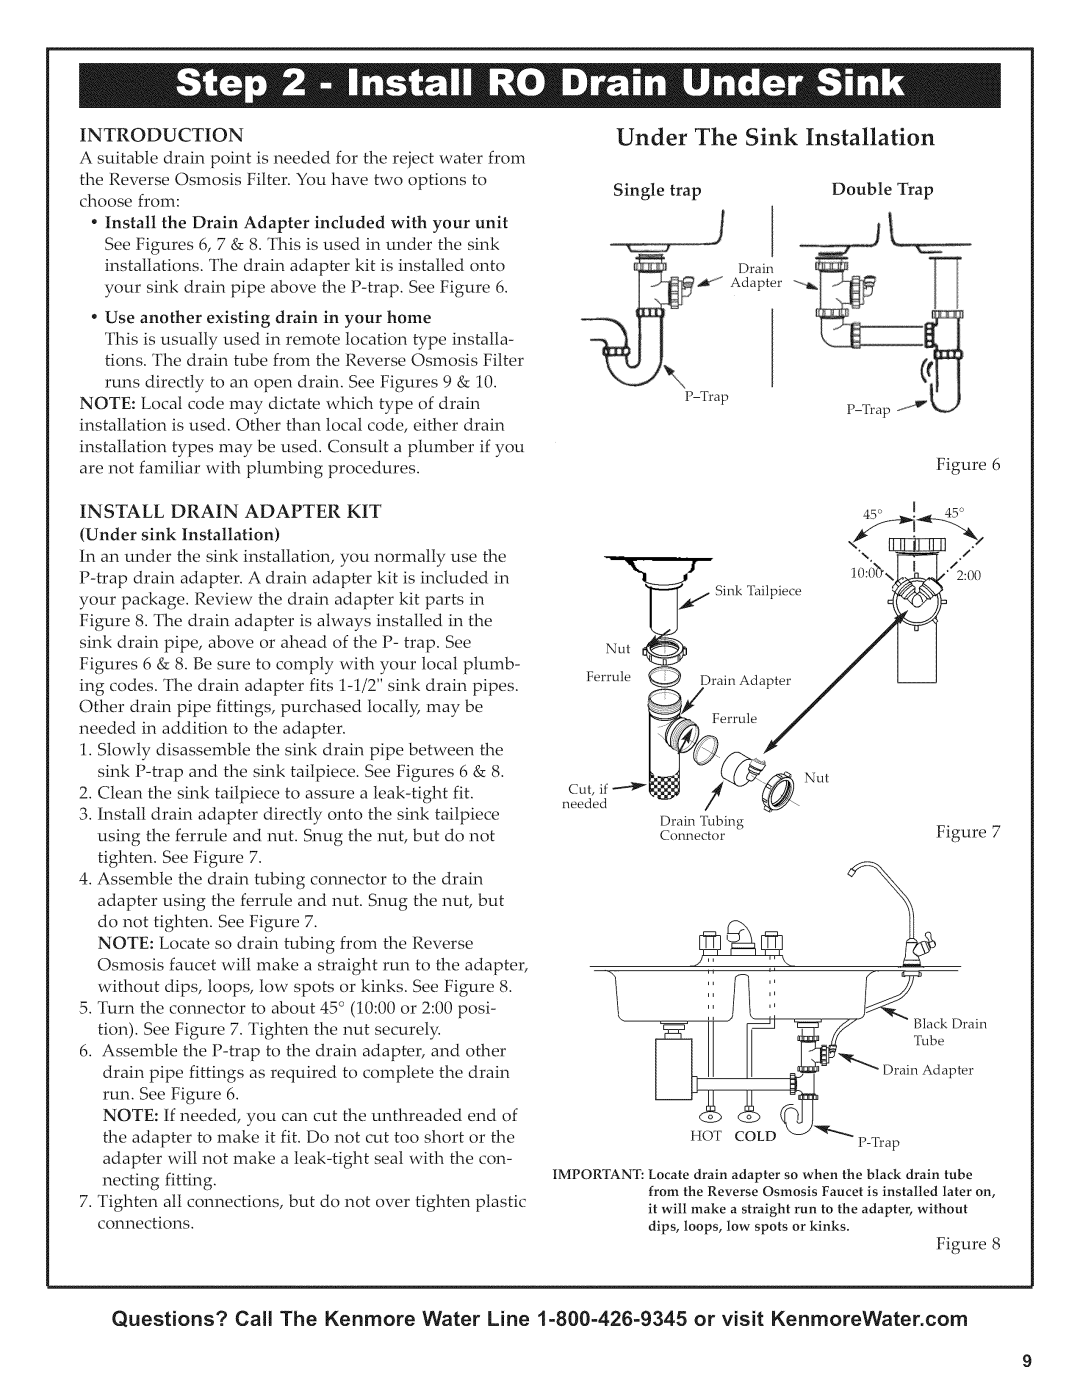 Kenmore 625.38556 owner manual Dran, Under The Sink Installation 